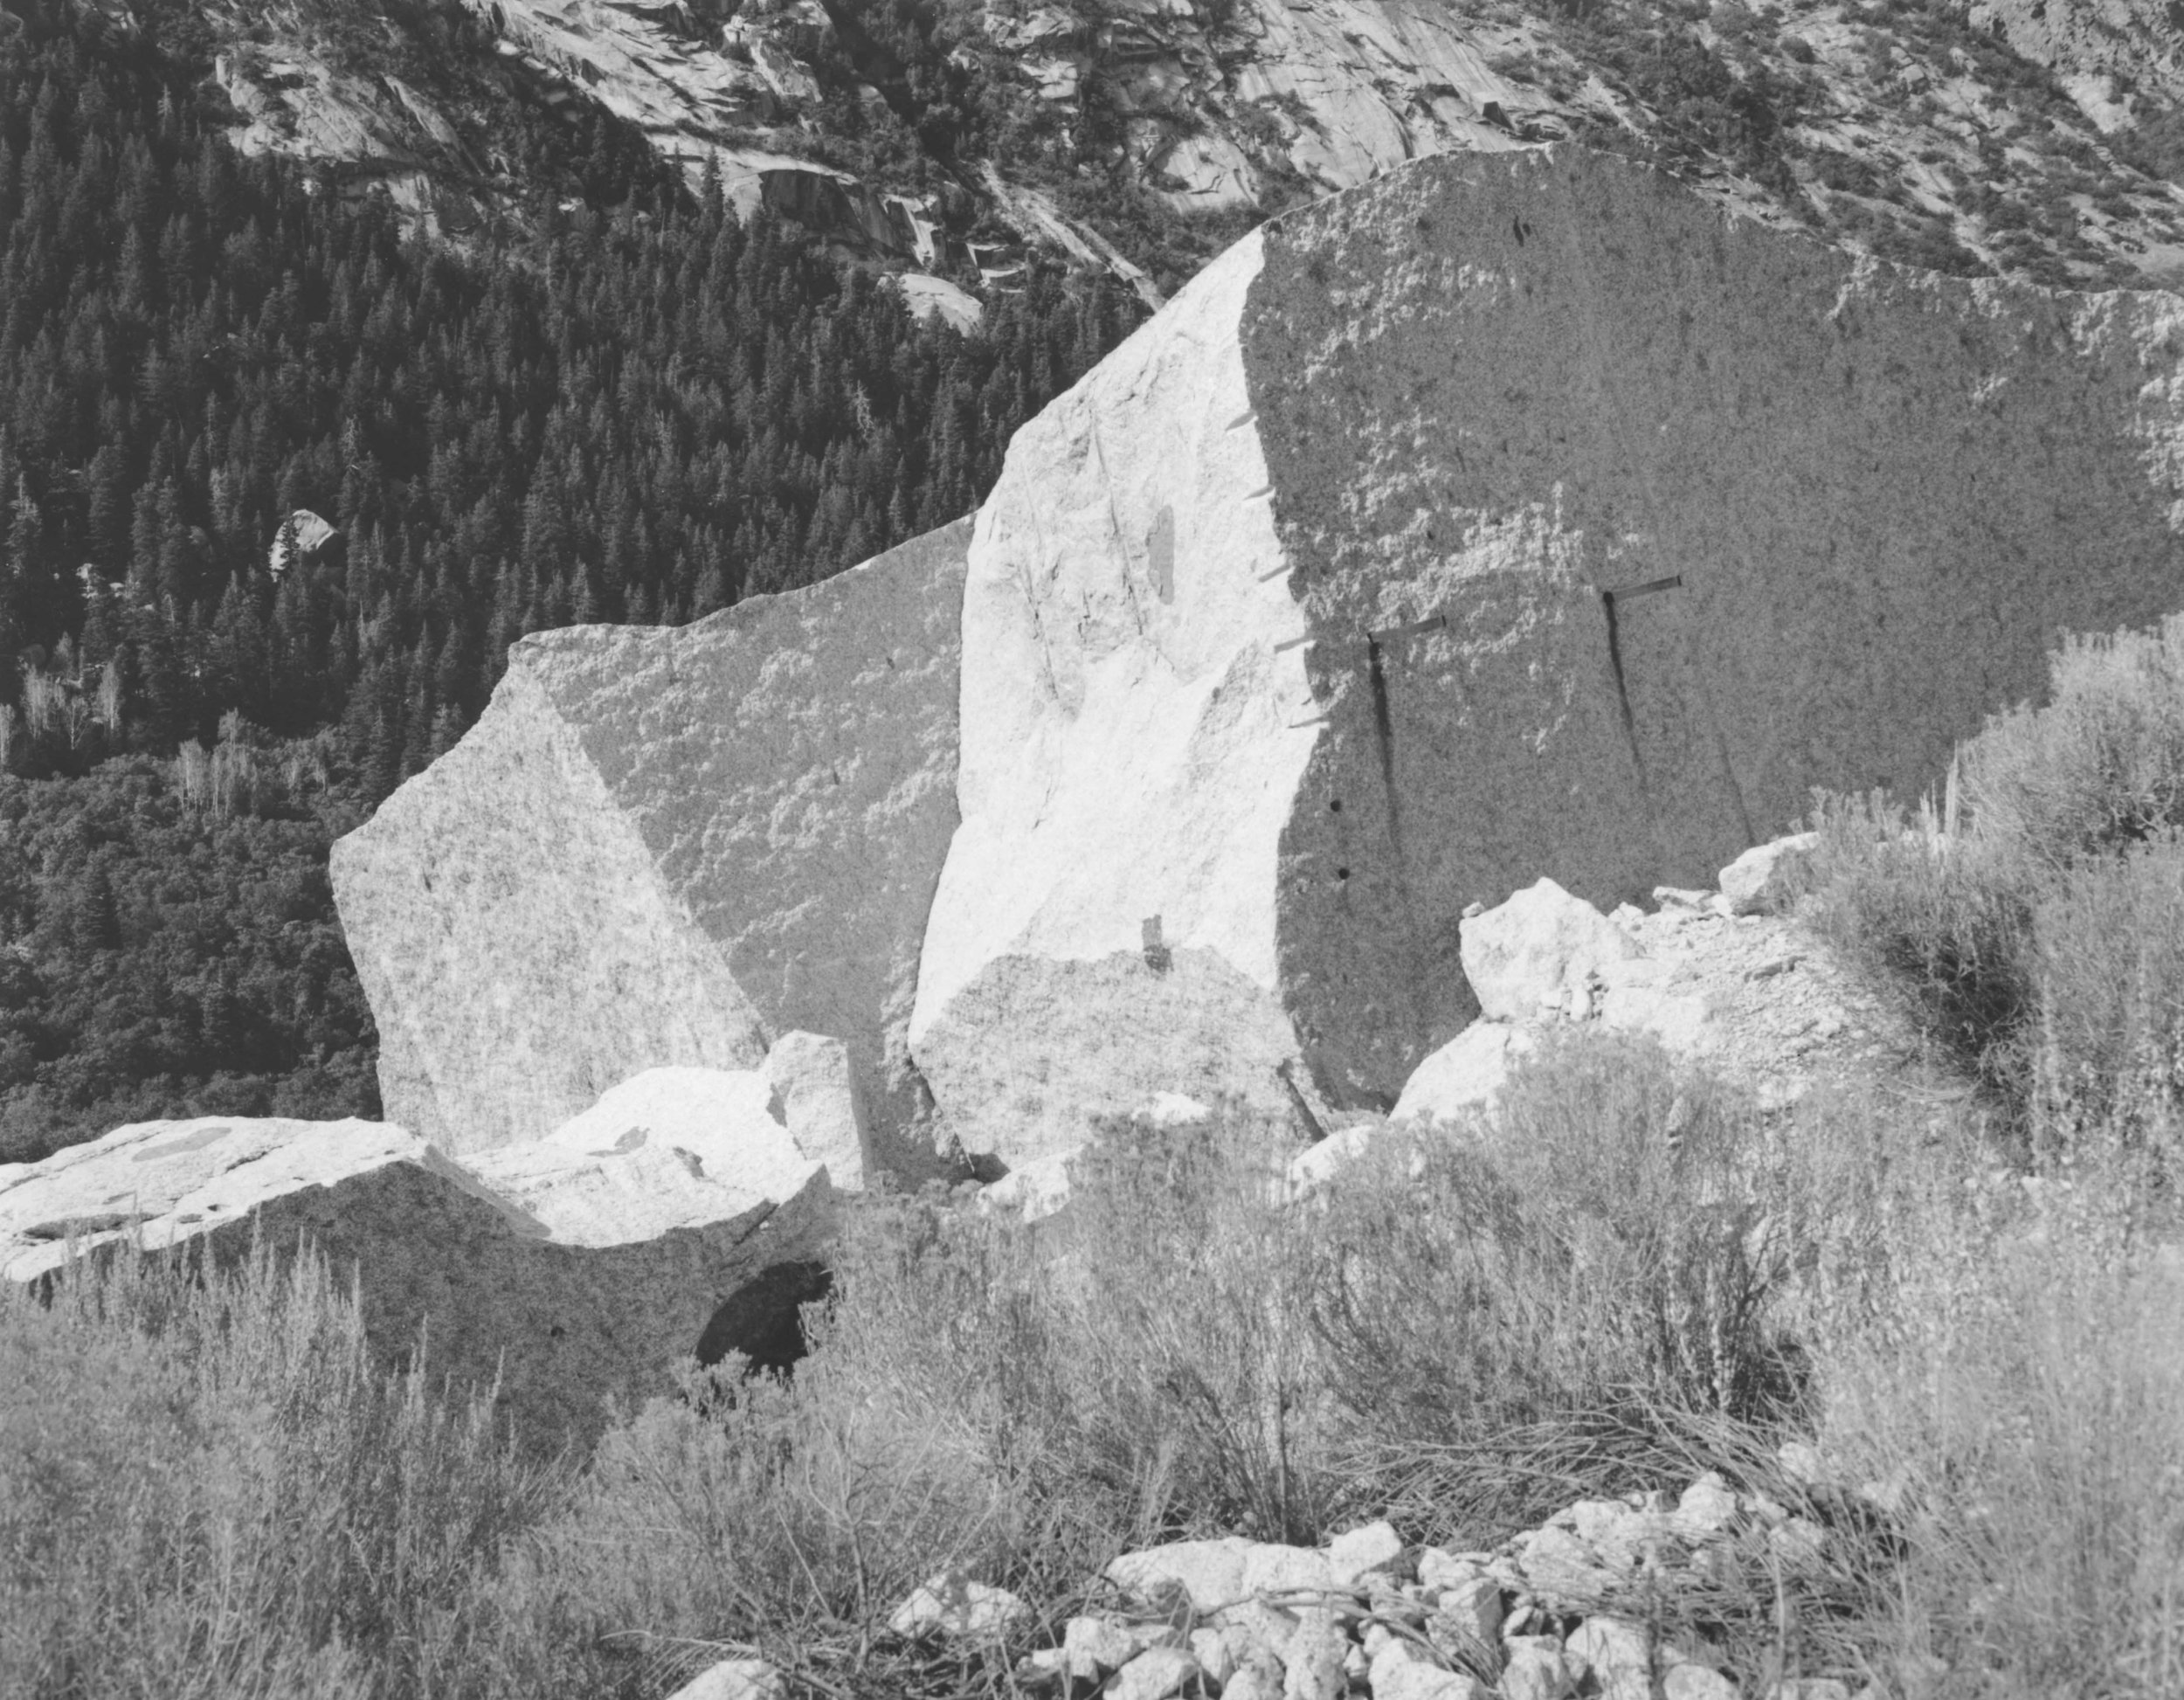   Jagged edges lined with drill holes and scaffold supports reveal the efforts of past Temple quarrymen at the Upper LDS Temple Granite Quarry in Little Cottonwood Canyon.  